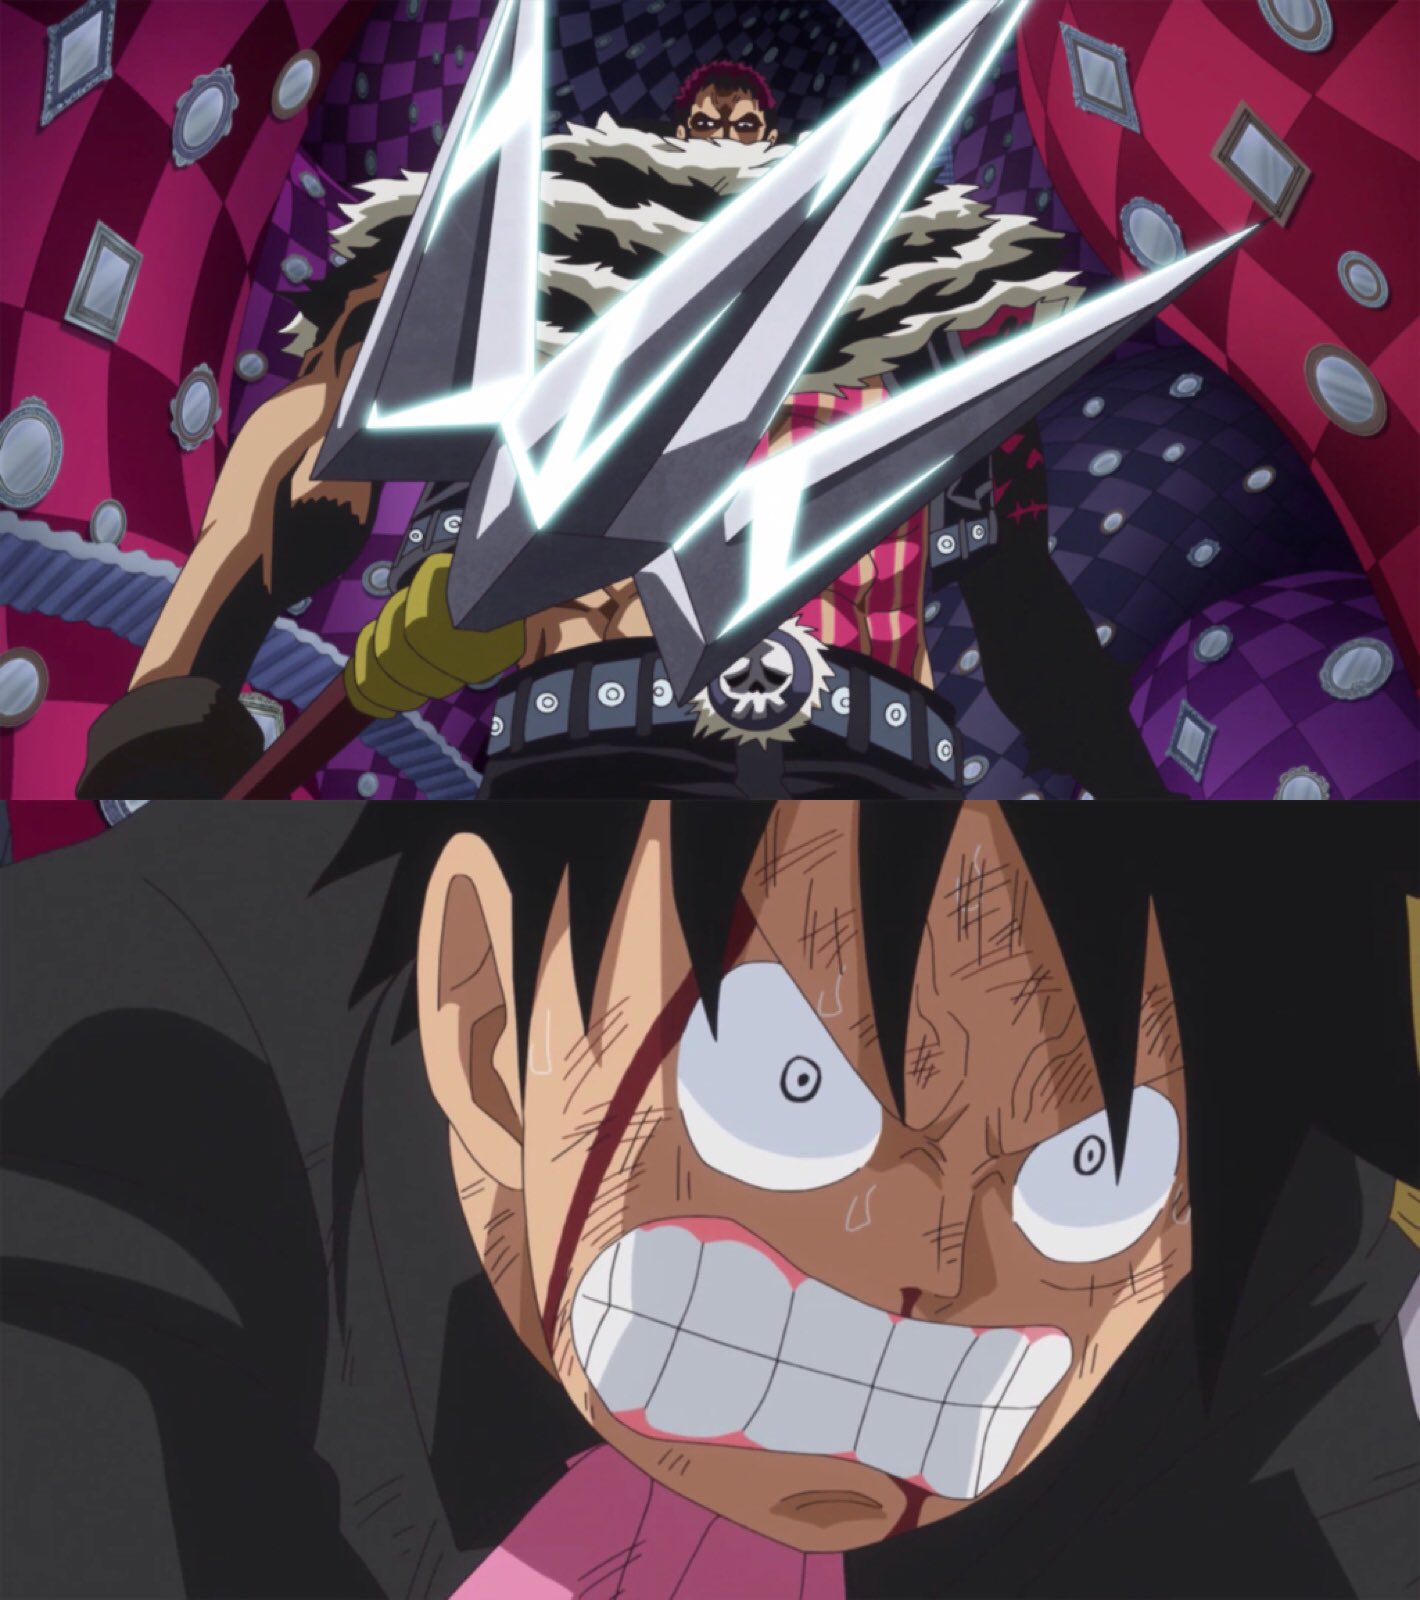 Brothere ワンピース Onepiece Ep 854 Katakuri Unleashes The Slam Jam On Luffy Katakuri Pulls Out The Mole Luffy Will Rendezvous With The Crew On Cacao Island At 1am Big